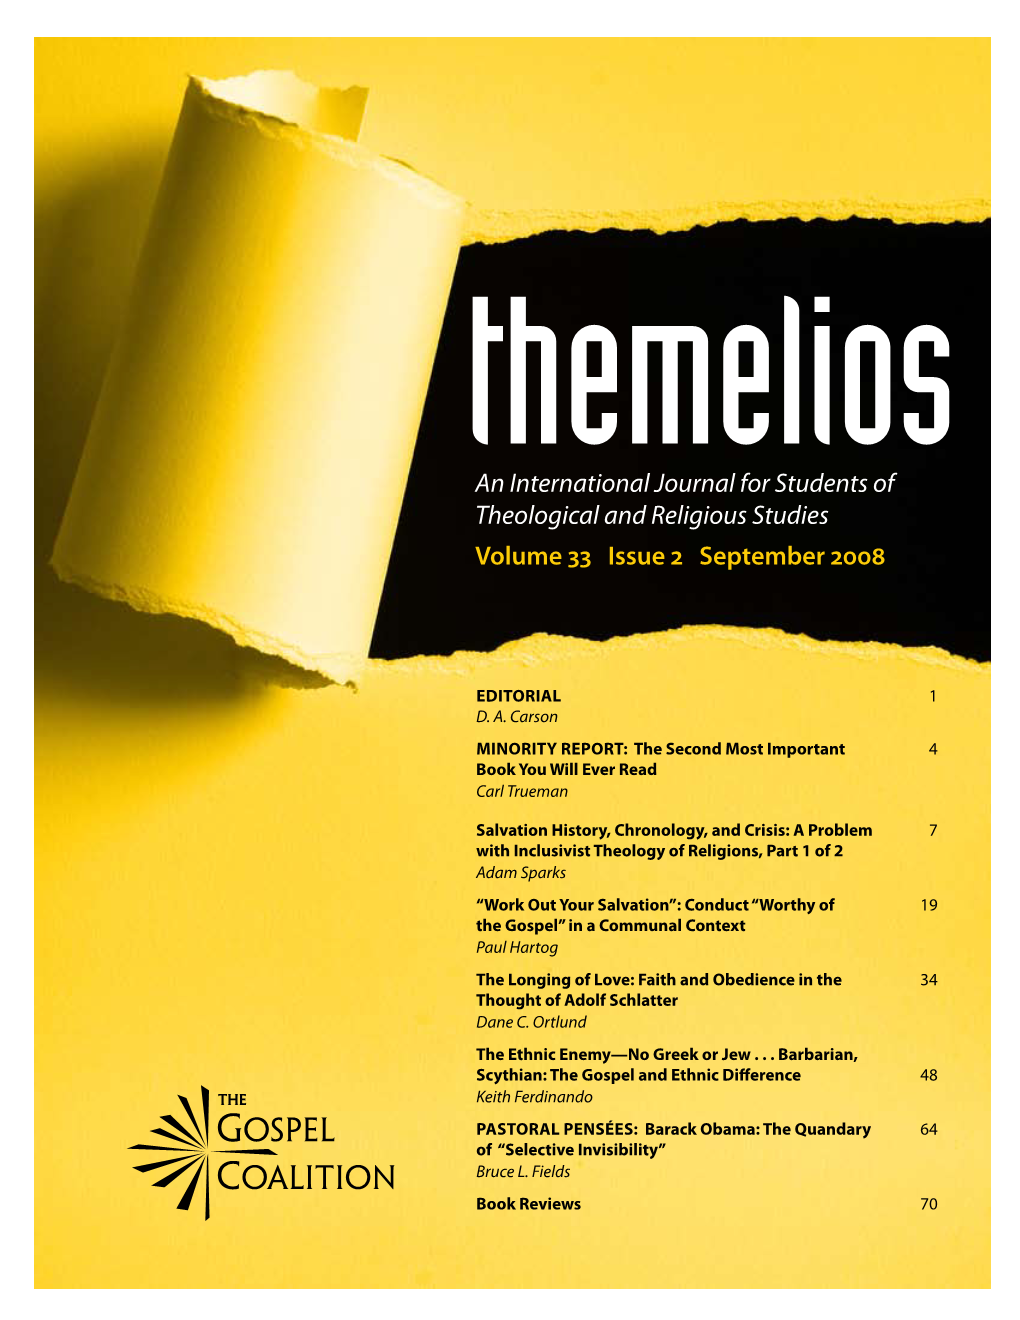 An International Journal for Students of Theological and Religious Studies Volume 33 Issue 2 September 2008